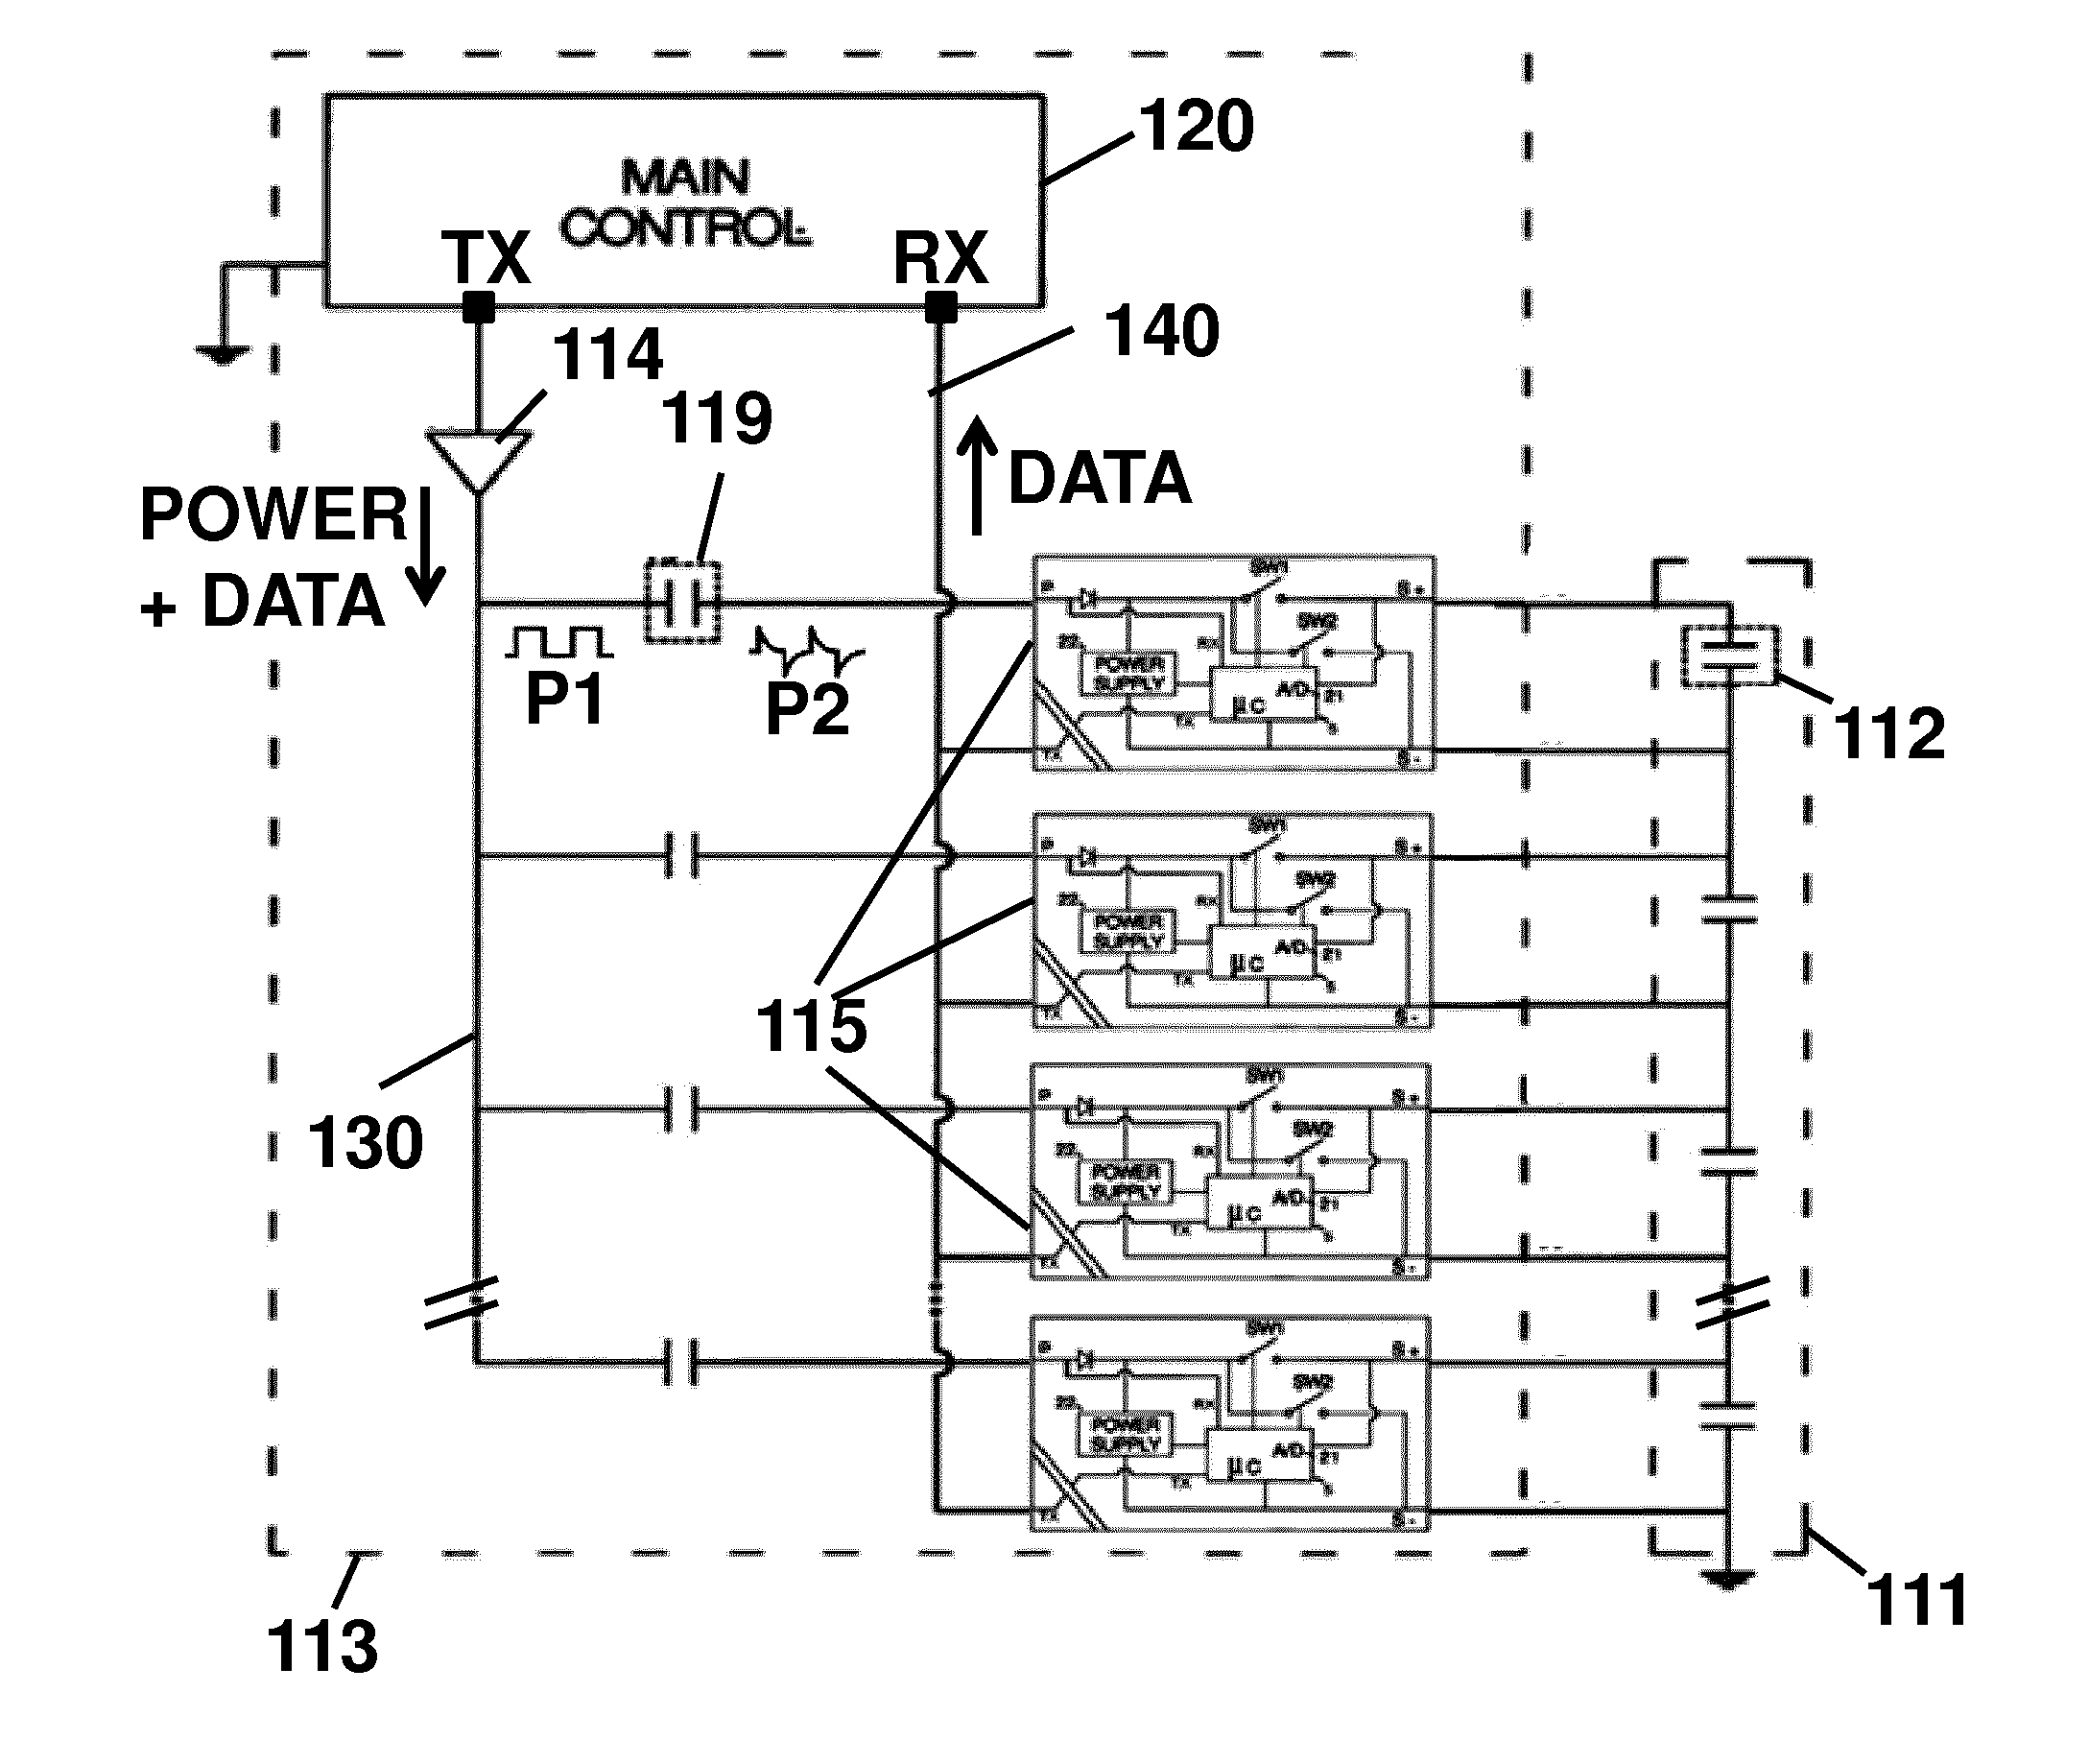 Method and system for providing pulsed power and data on a bus